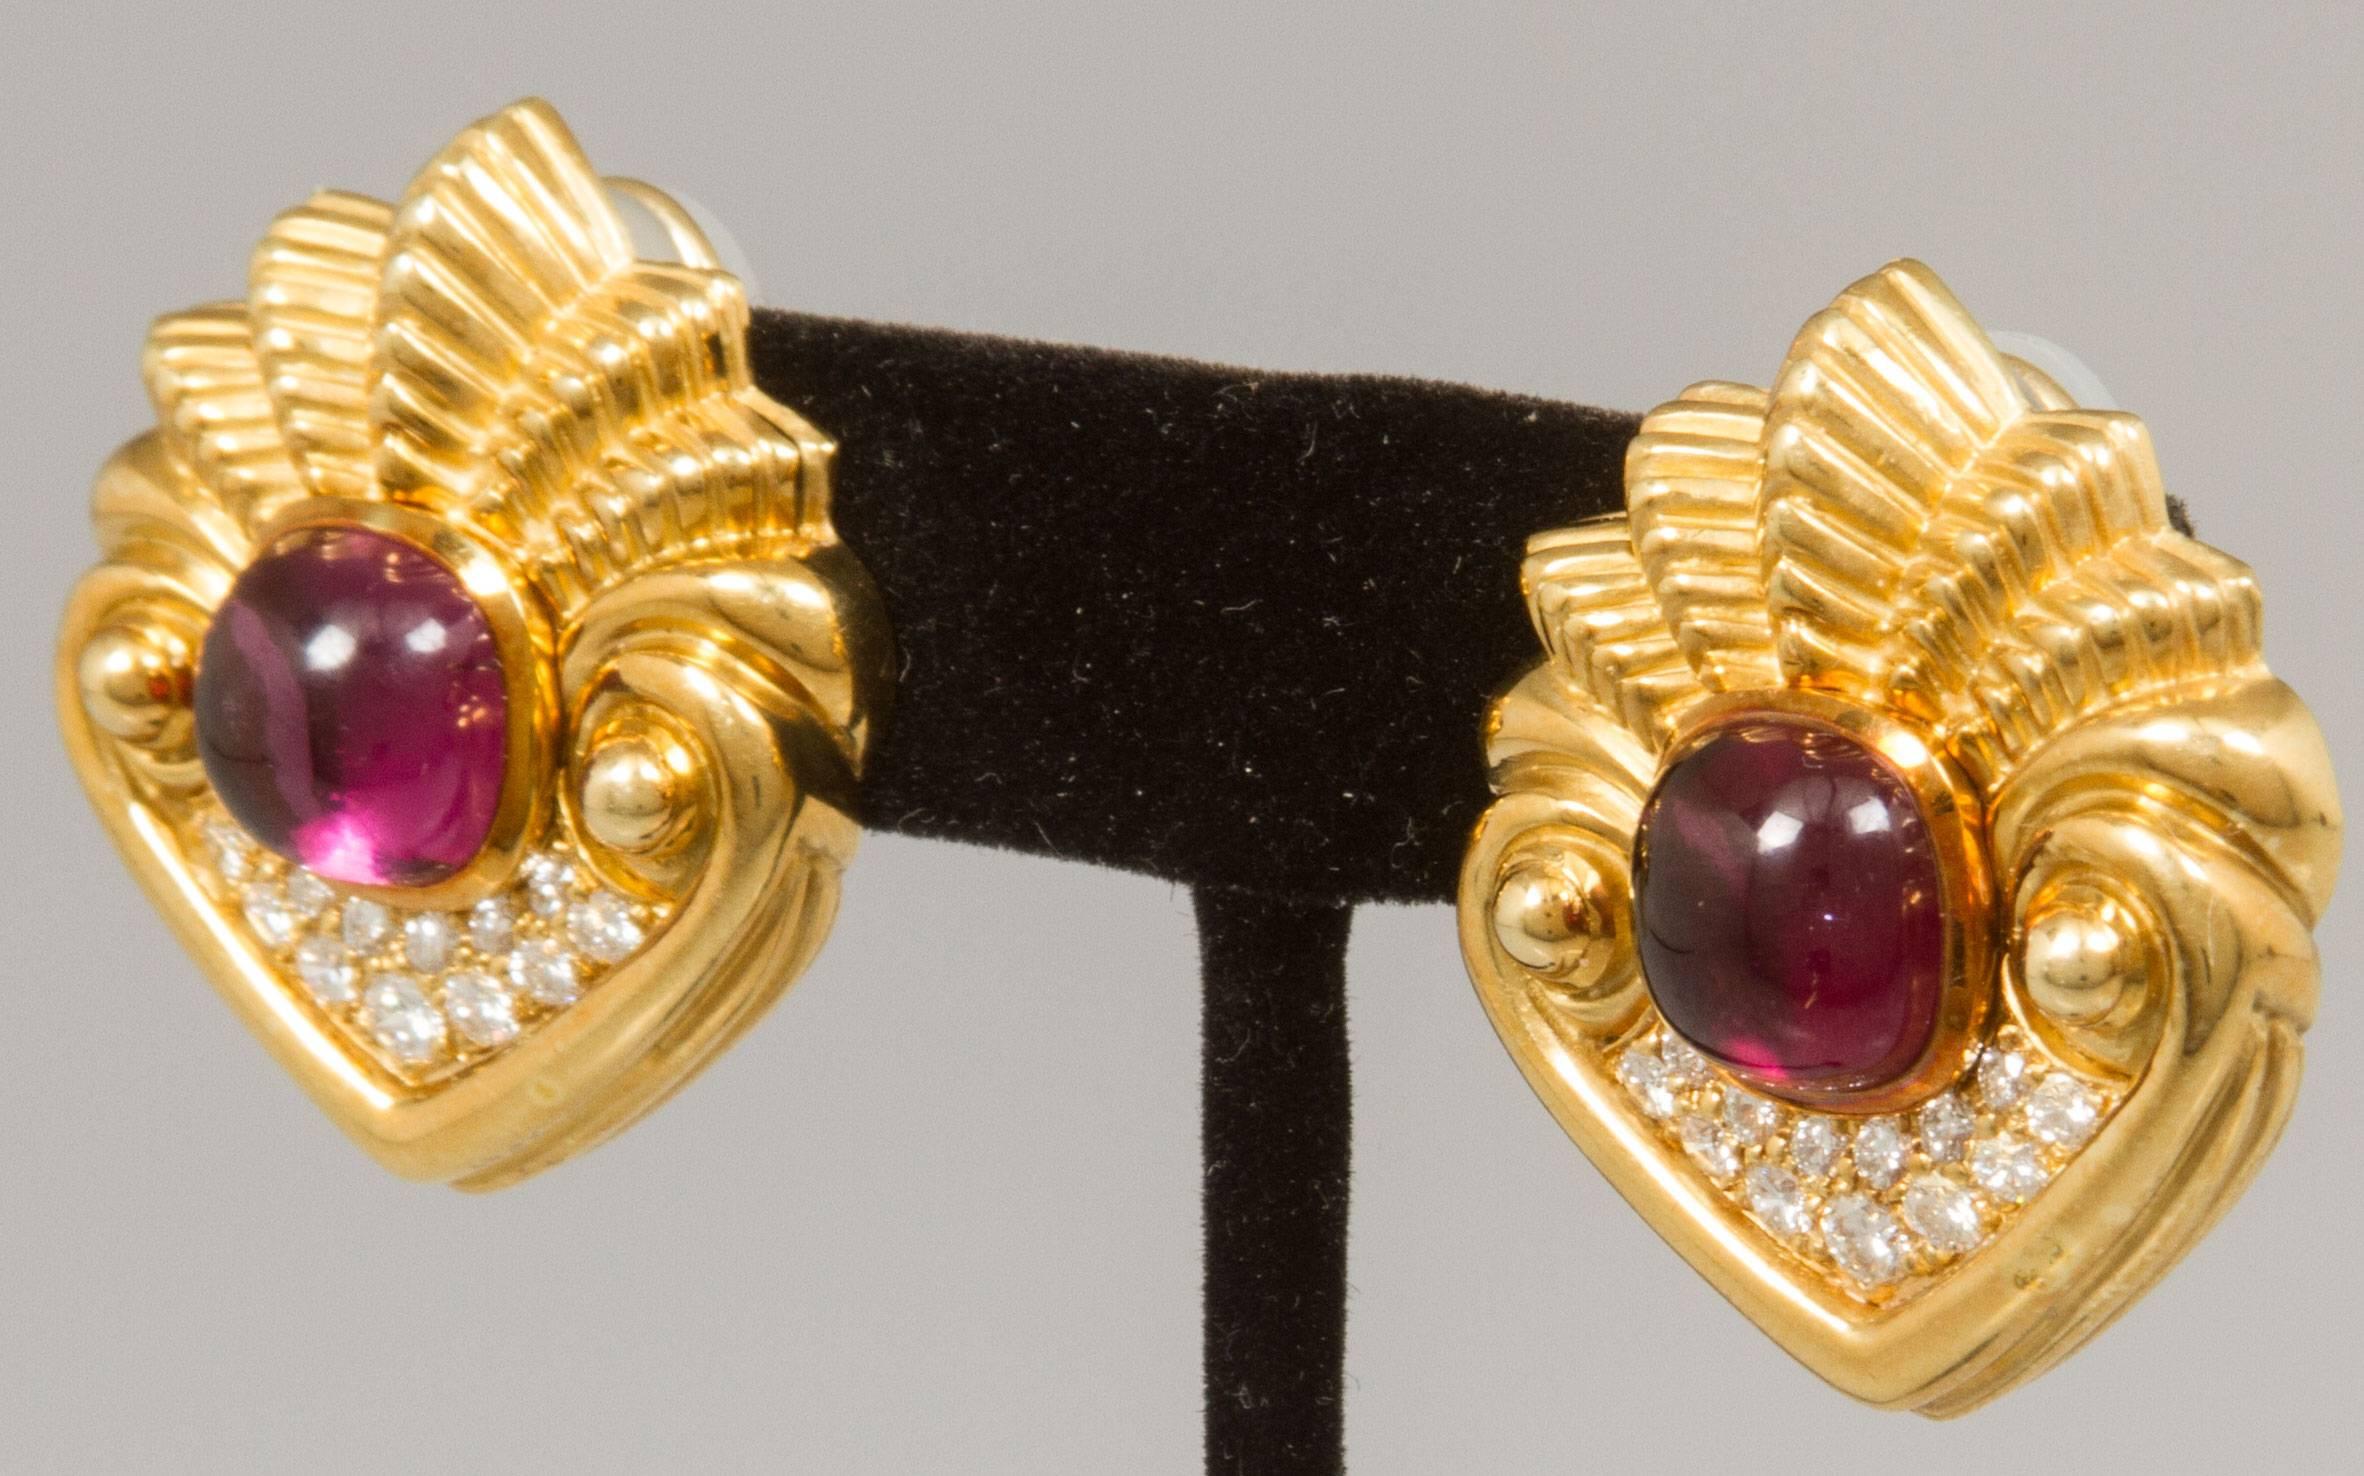 Cabochon cut amethysts and very high quality round diamonds adorn this pair of coquille shaped ear clips.  The gold casting is also very high quality